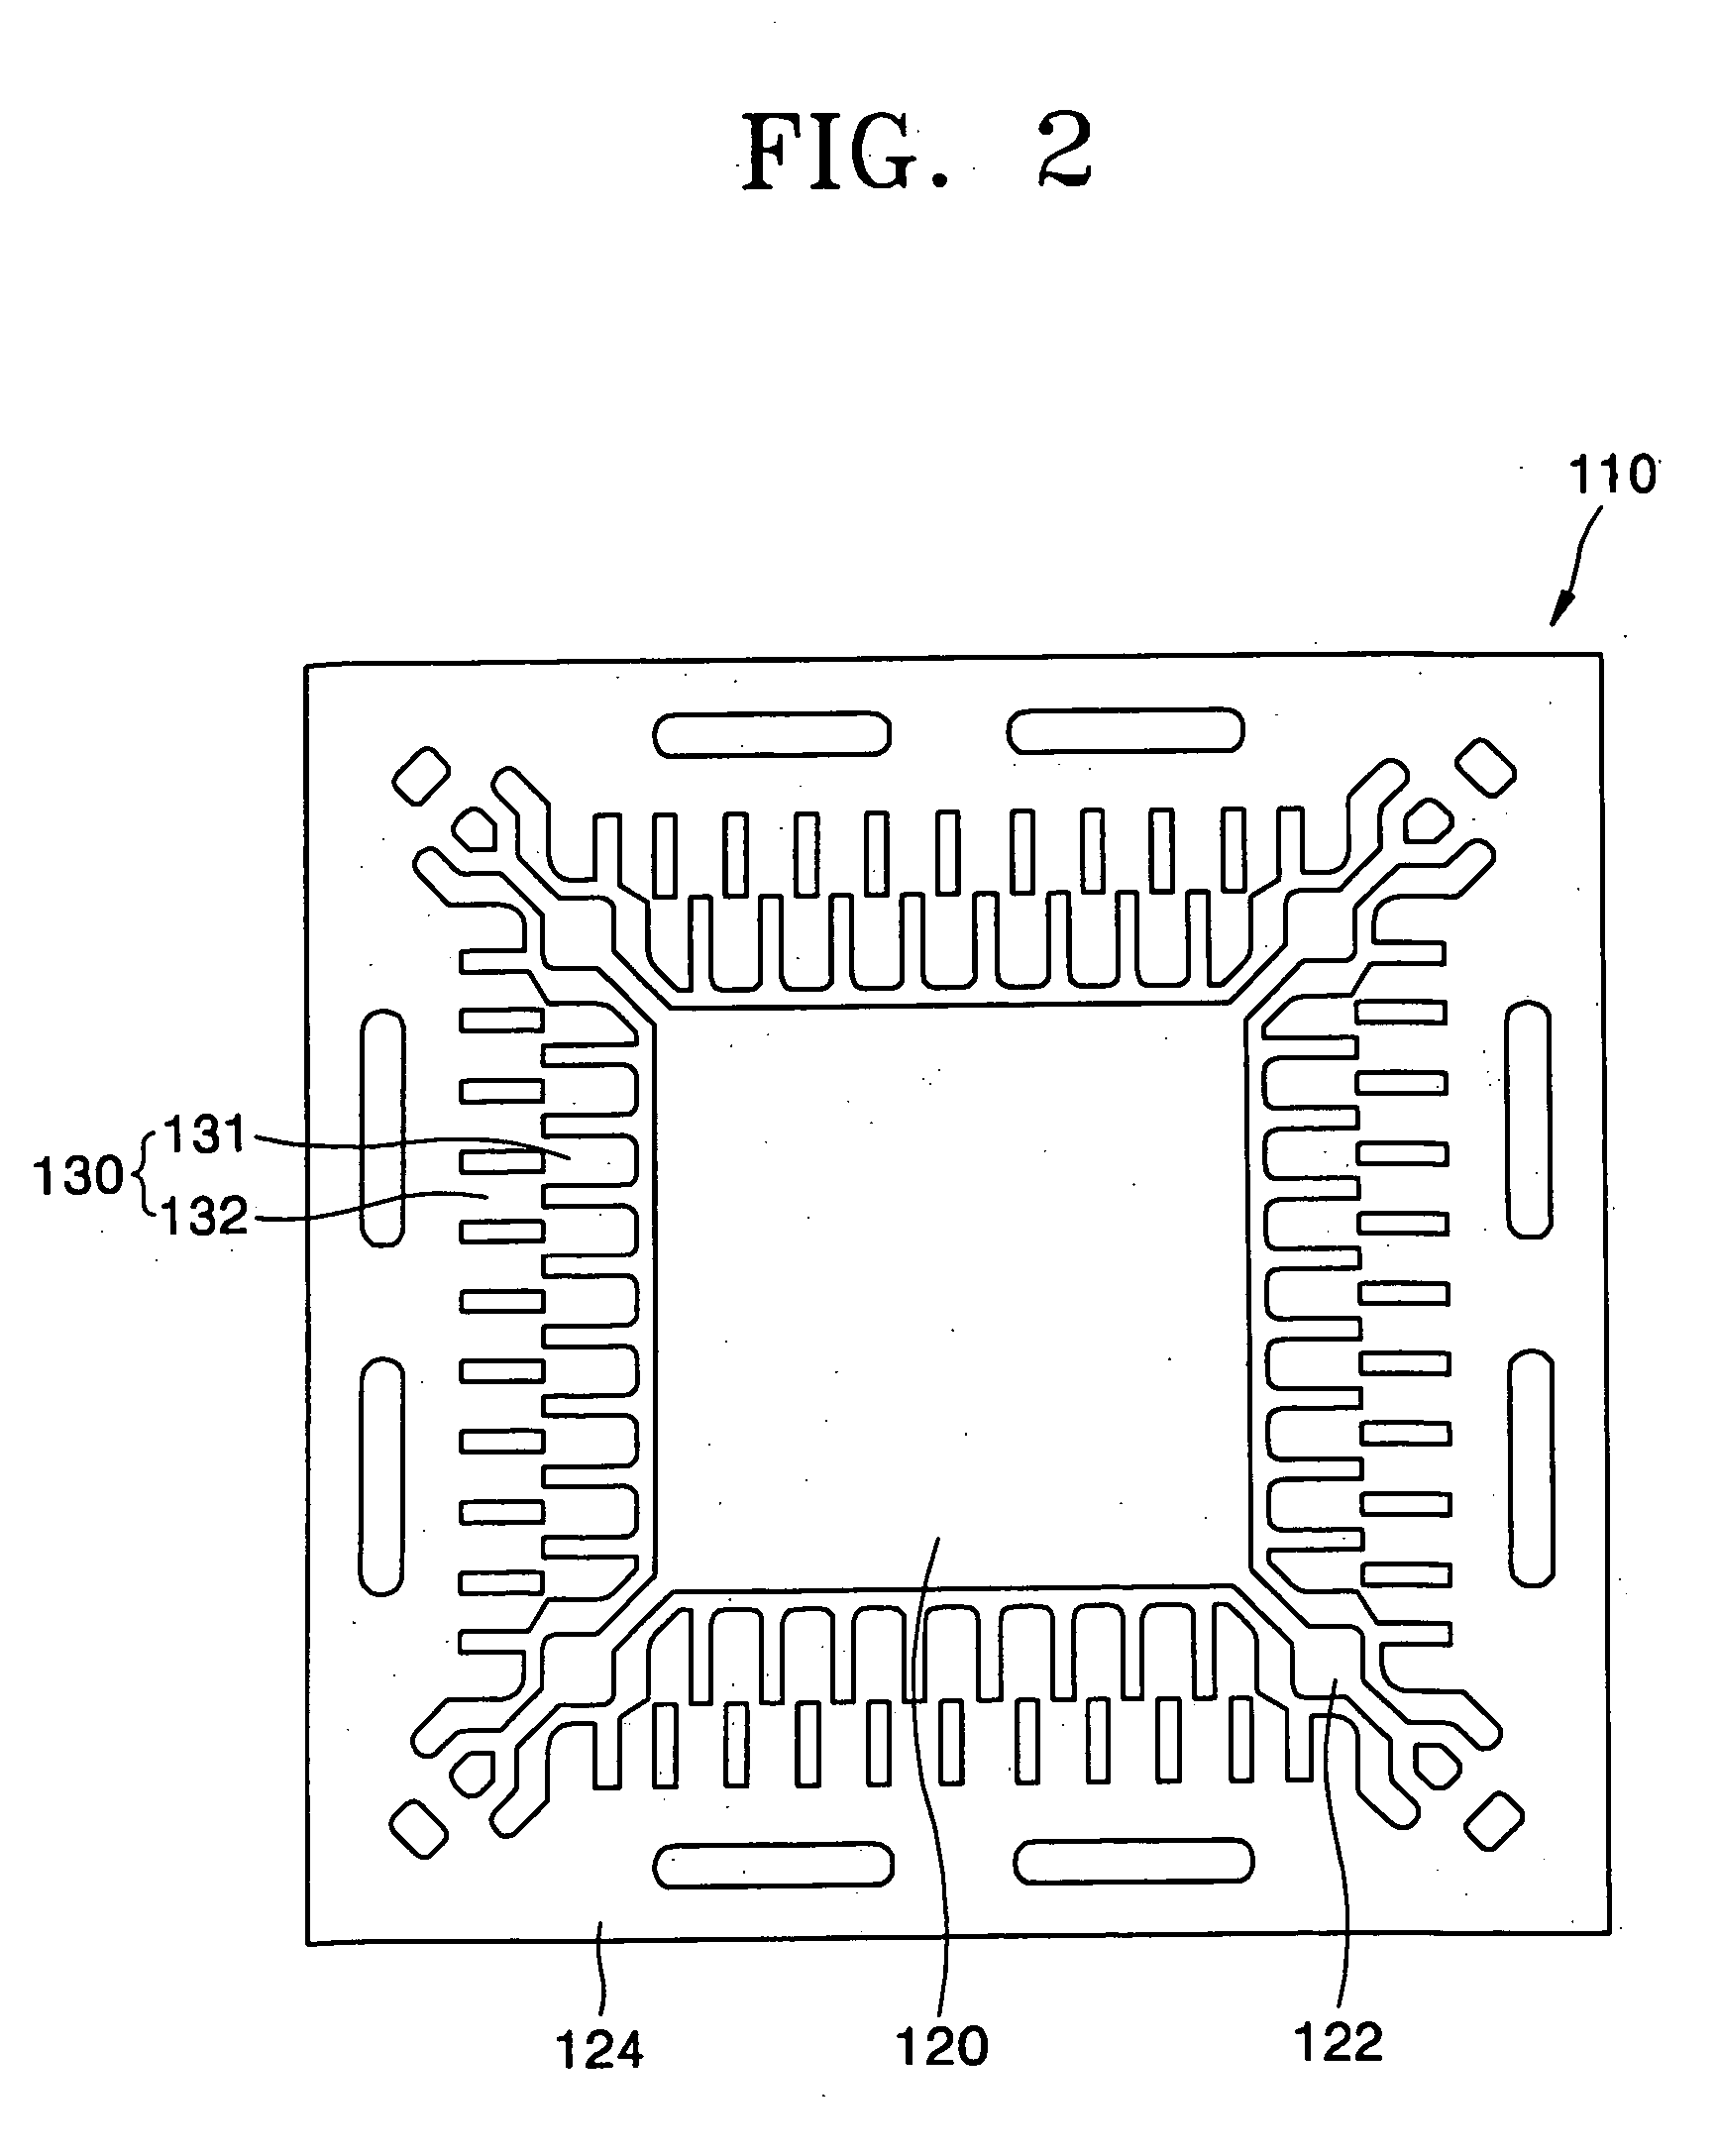 Method of manufacturing semiconductor package having multiple rows of leads